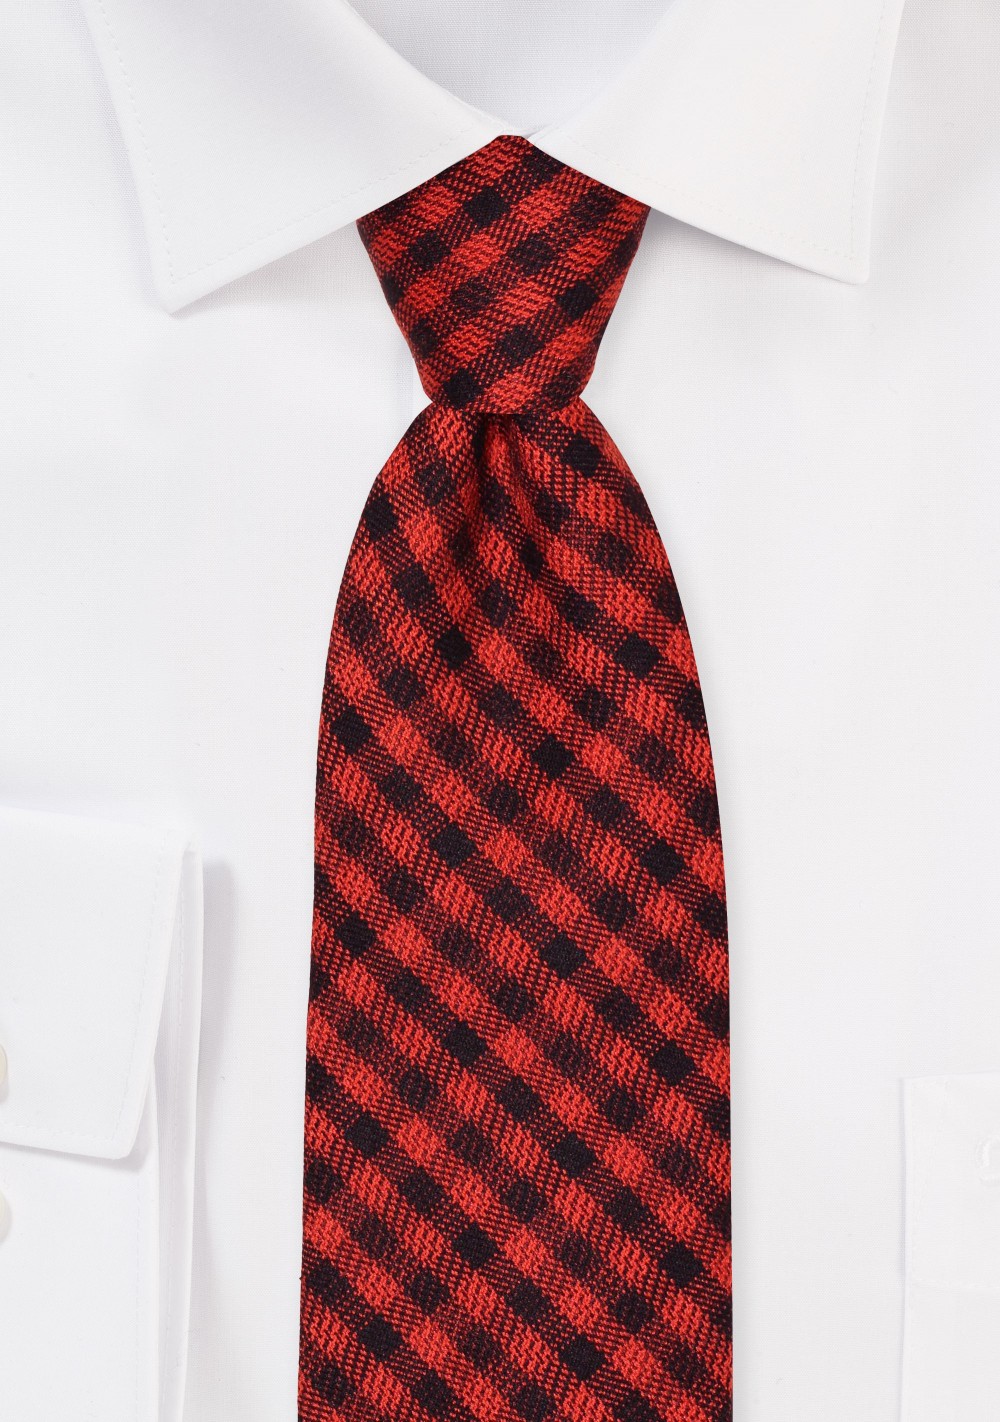 Punk Rock Check Skinny Tie in Red and Black